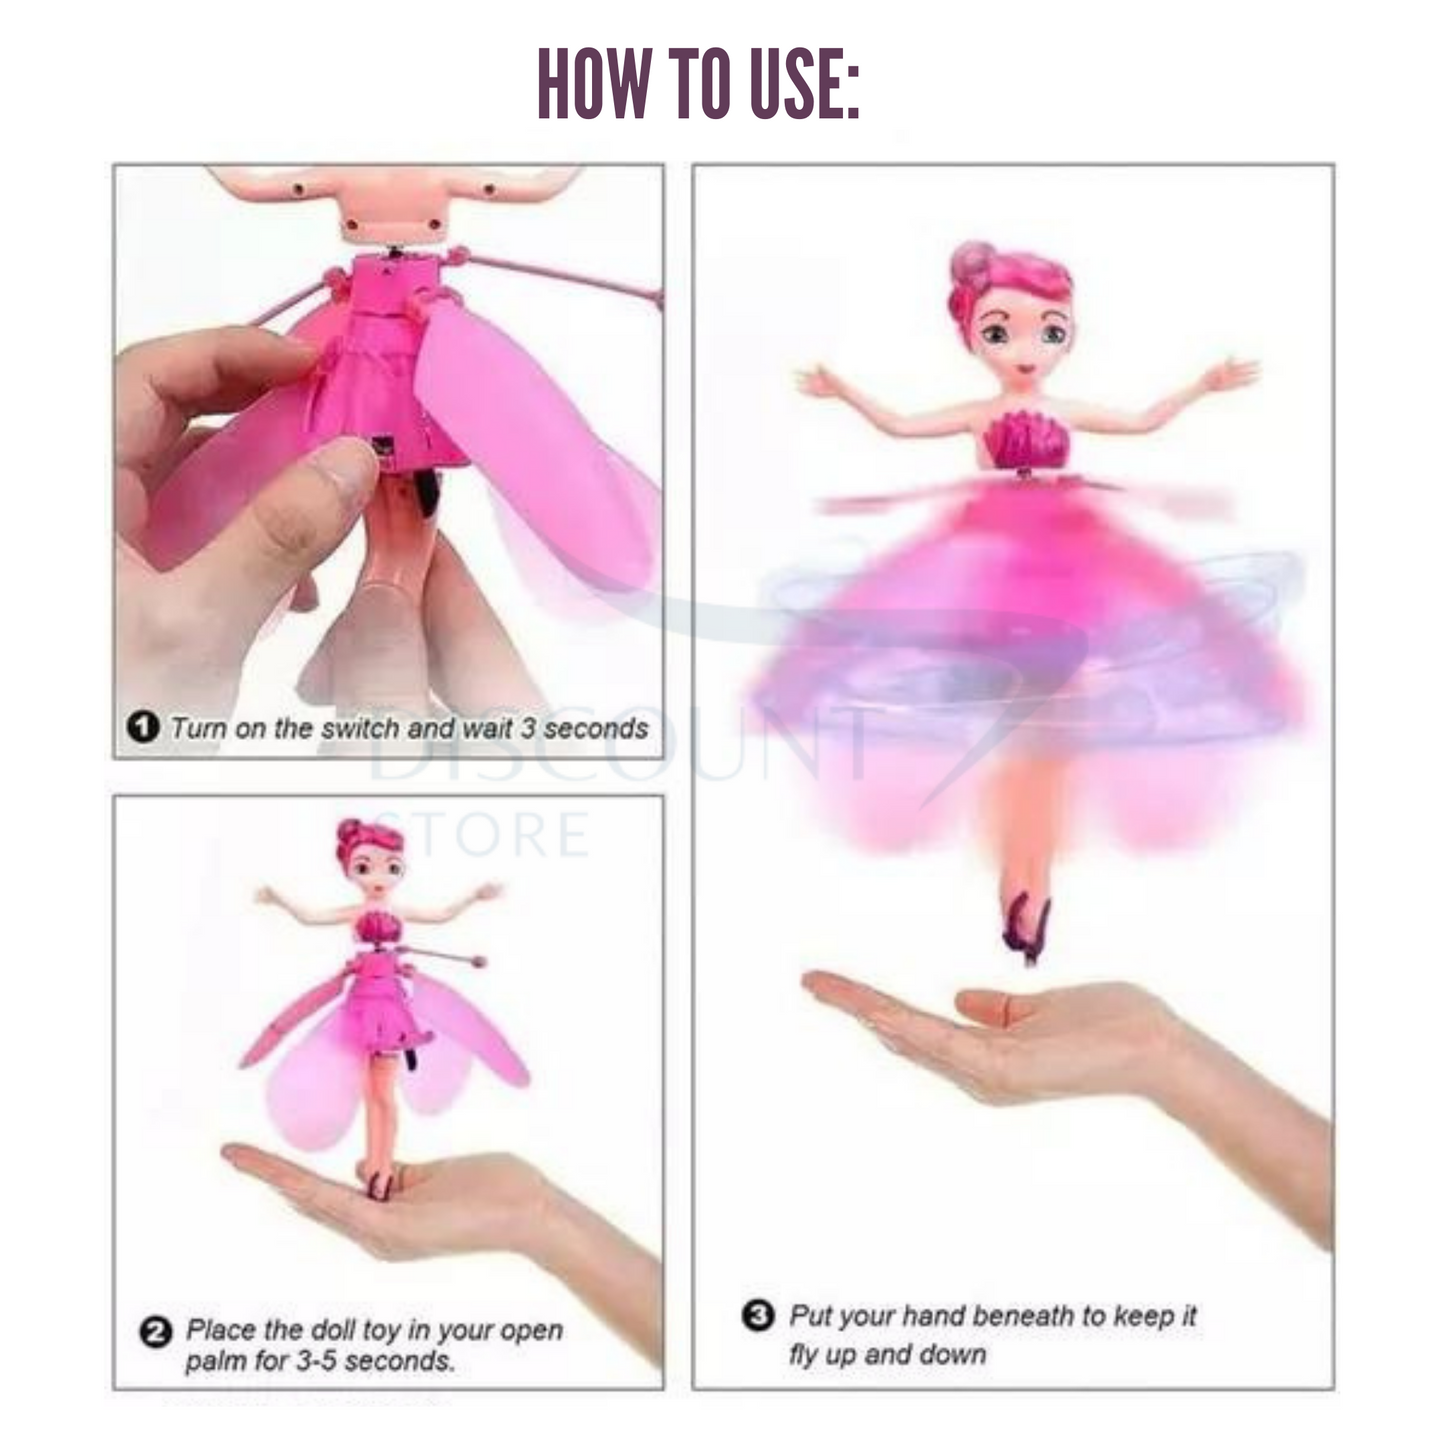 Magic Flying Fairy Princess Doll - (FREE Delivery)